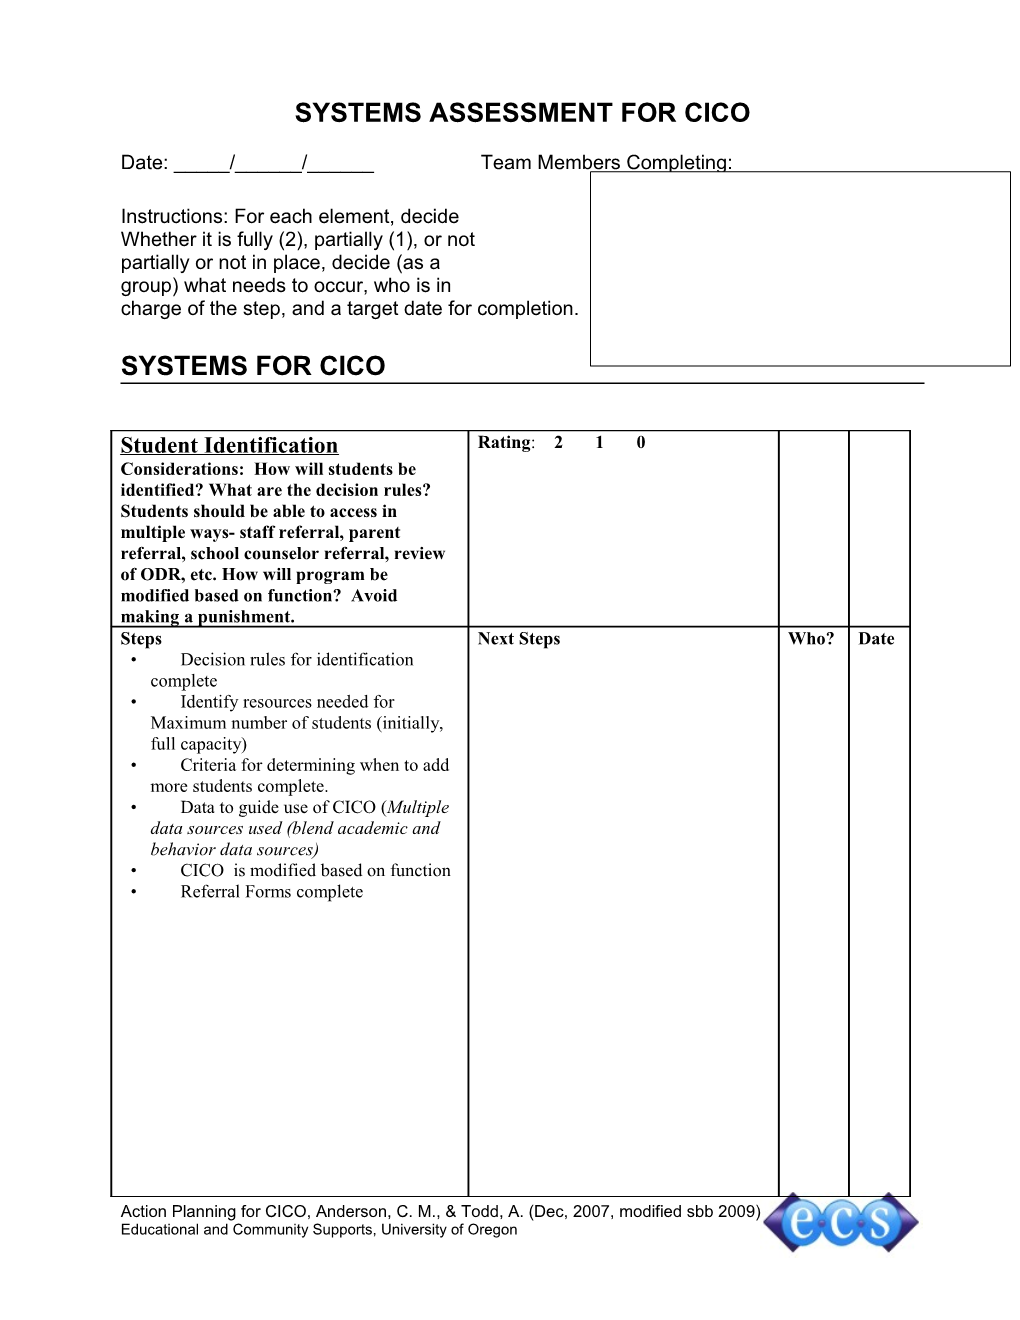 Systems Assessment for Cico